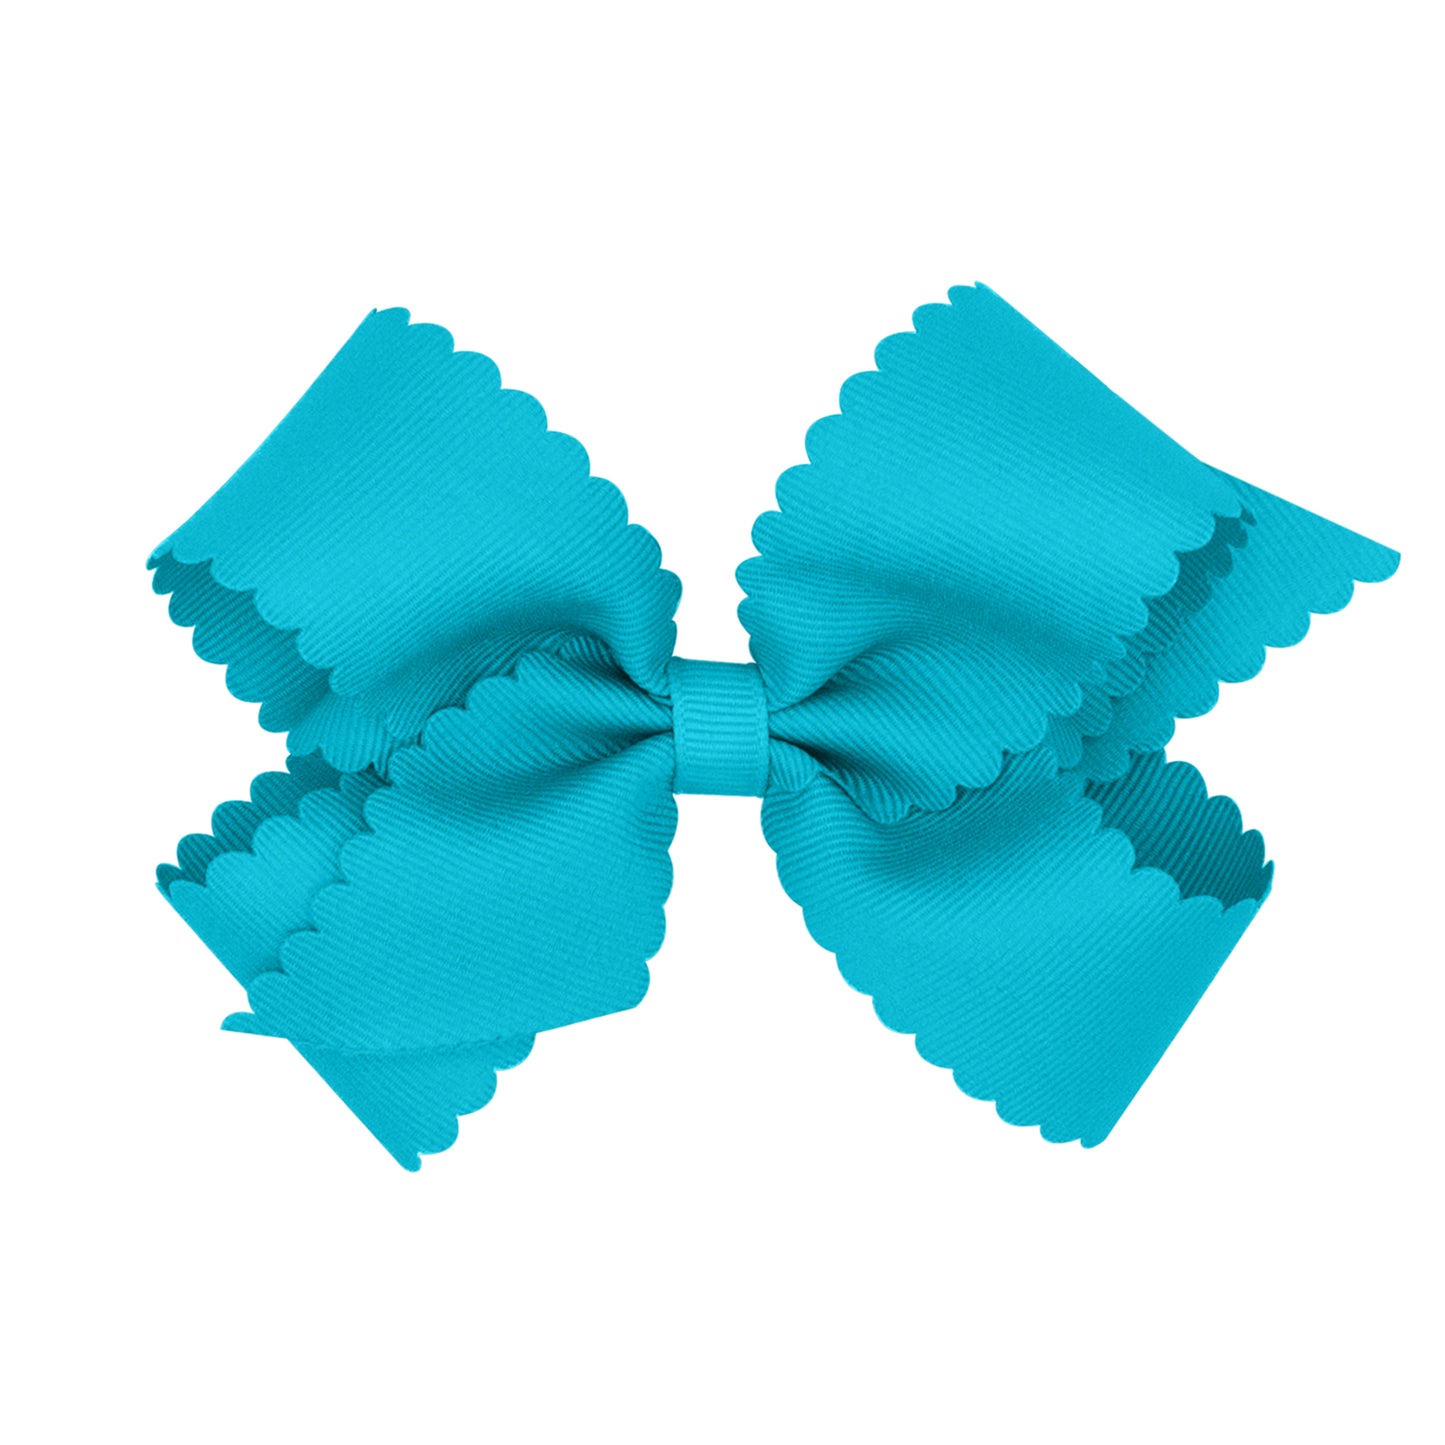 King Scalloped Edge Grosgrain Bow - New Turquoise Kids Hair Accessories Wee Ones   